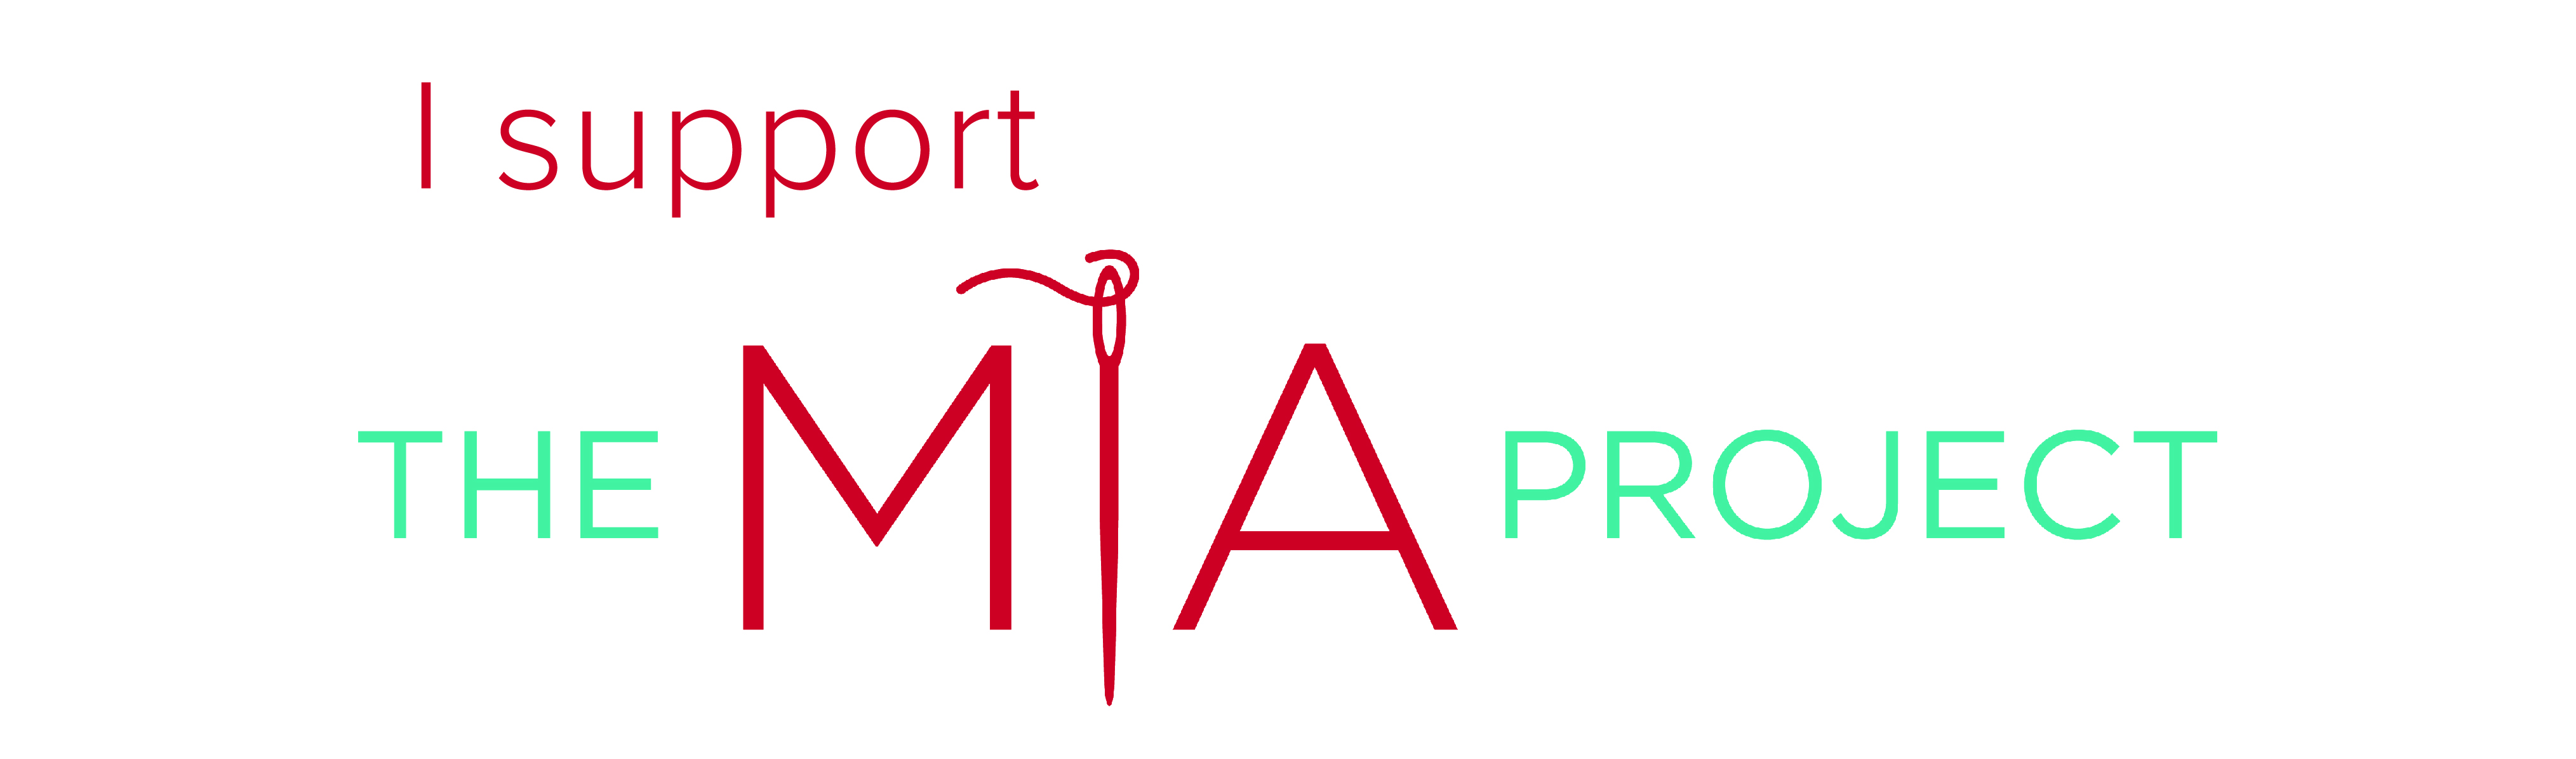 I support the MIA project